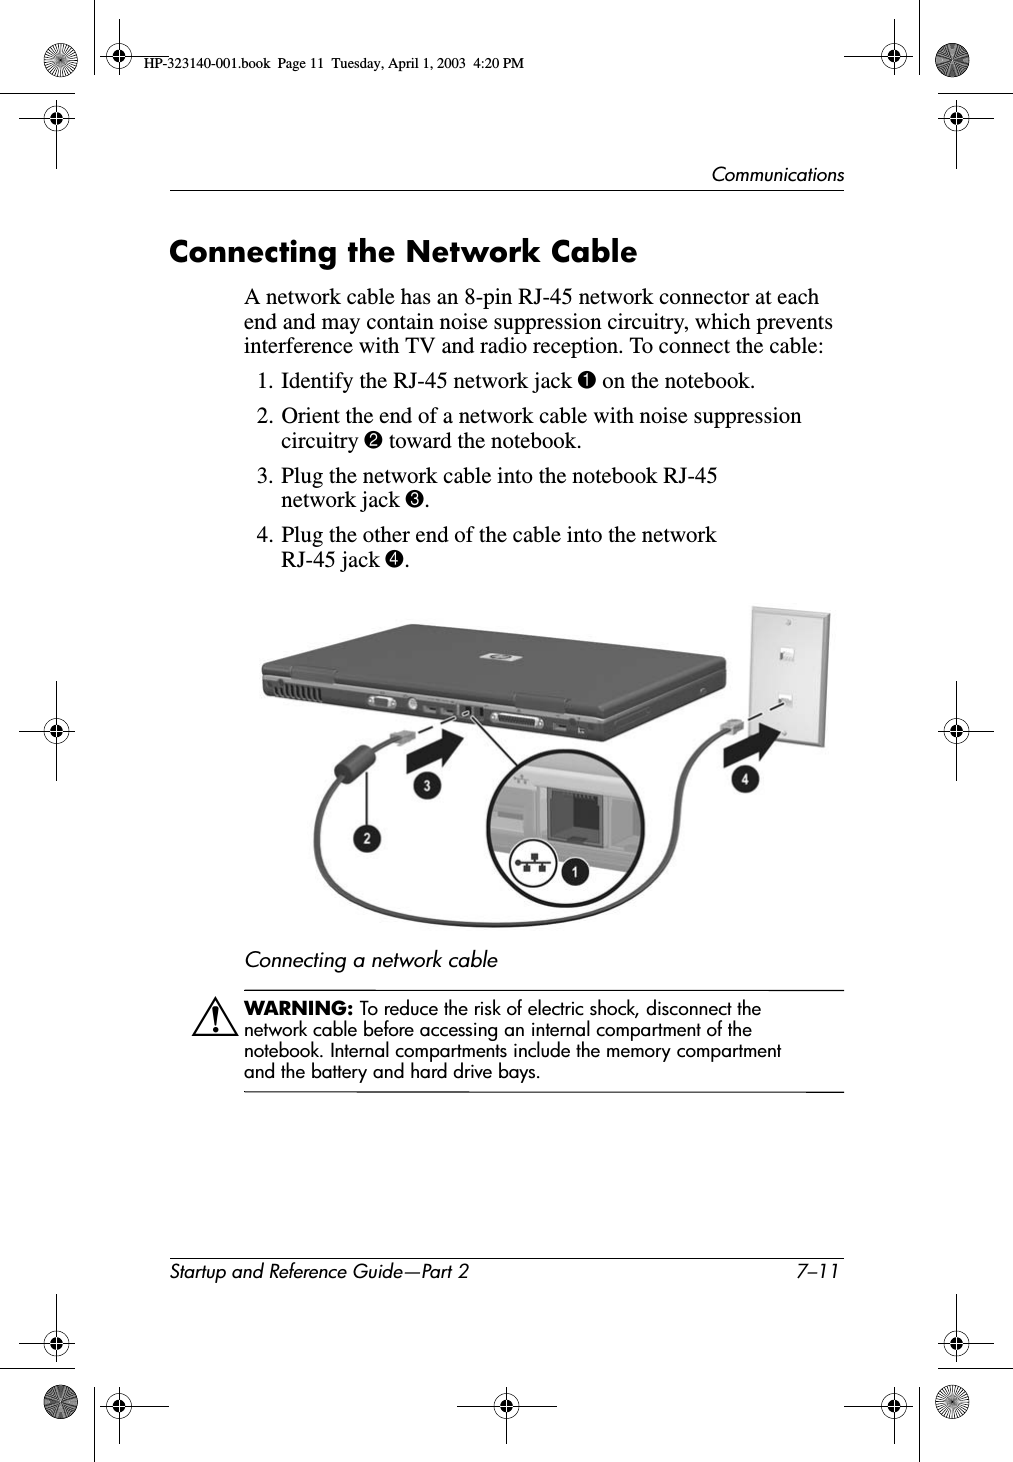 CommunicationsStartup and Reference Guide—Part 2 7–11Connecting the Network CableA network cable has an 8-pin RJ-45 network connector at each end and may contain noise suppression circuitry, which prevents interference with TV and radio reception. To connect the cable:1. Identify the RJ-45 network jack 1 on the notebook.2. Orient the end of a network cable with noise suppression circuitry 2 toward the notebook.3. Plug the network cable into the notebook RJ-45 network jack 3.4. Plug the other end of the cable into the network RJ-45 jack 4.Connecting a network cableÅWARNING: To reduce the risk of electric shock, disconnect the network cable before accessing an internal compartment of the notebook. Internal compartments include the memory compartment and the battery and hard drive bays.HP-323140-001.book  Page 11  Tuesday, April 1, 2003  4:20 PM